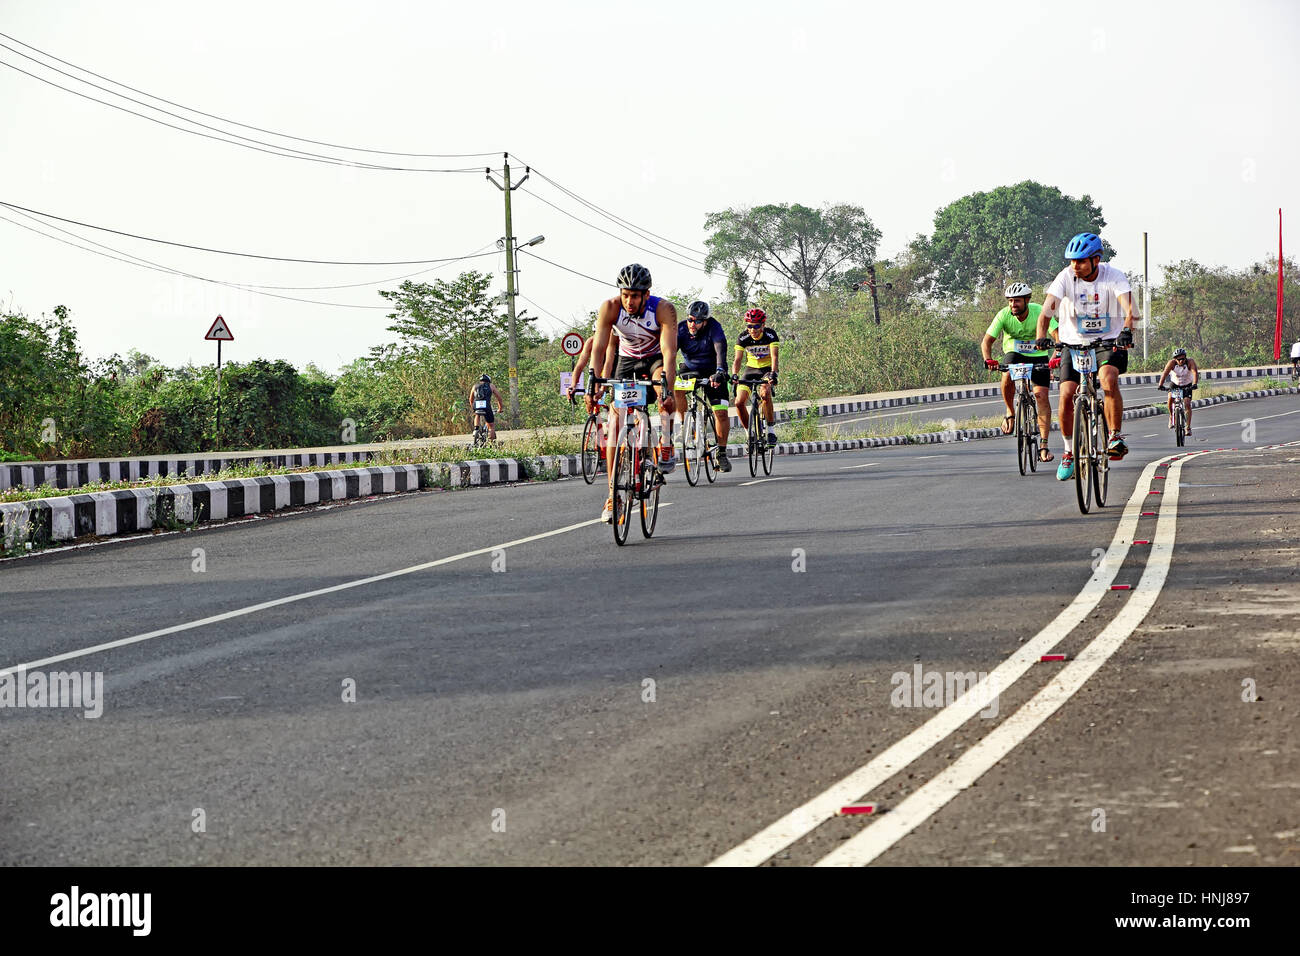 Participants in Goa Triathlon 2017, after finishing swimming part, competing in the running and cycling leg in the scenic highway at Bambolim in Goa Stock Photo